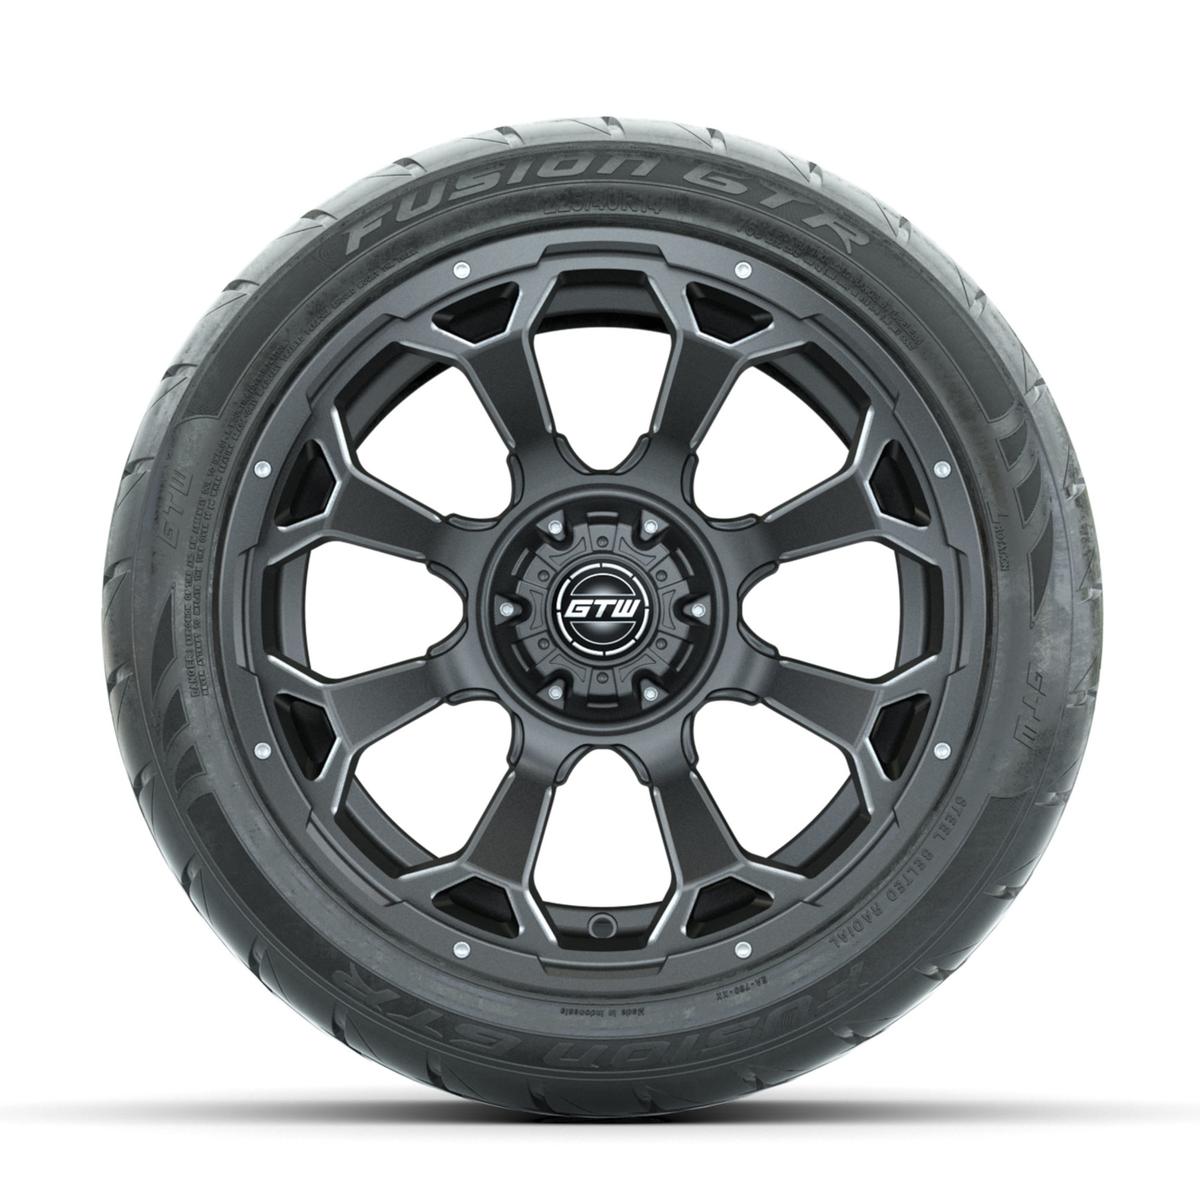 GTW Raven Off-Road Matte Grey 14 in Wheels with 225/40-R14 Fusion GTR Street Tires – Full Set